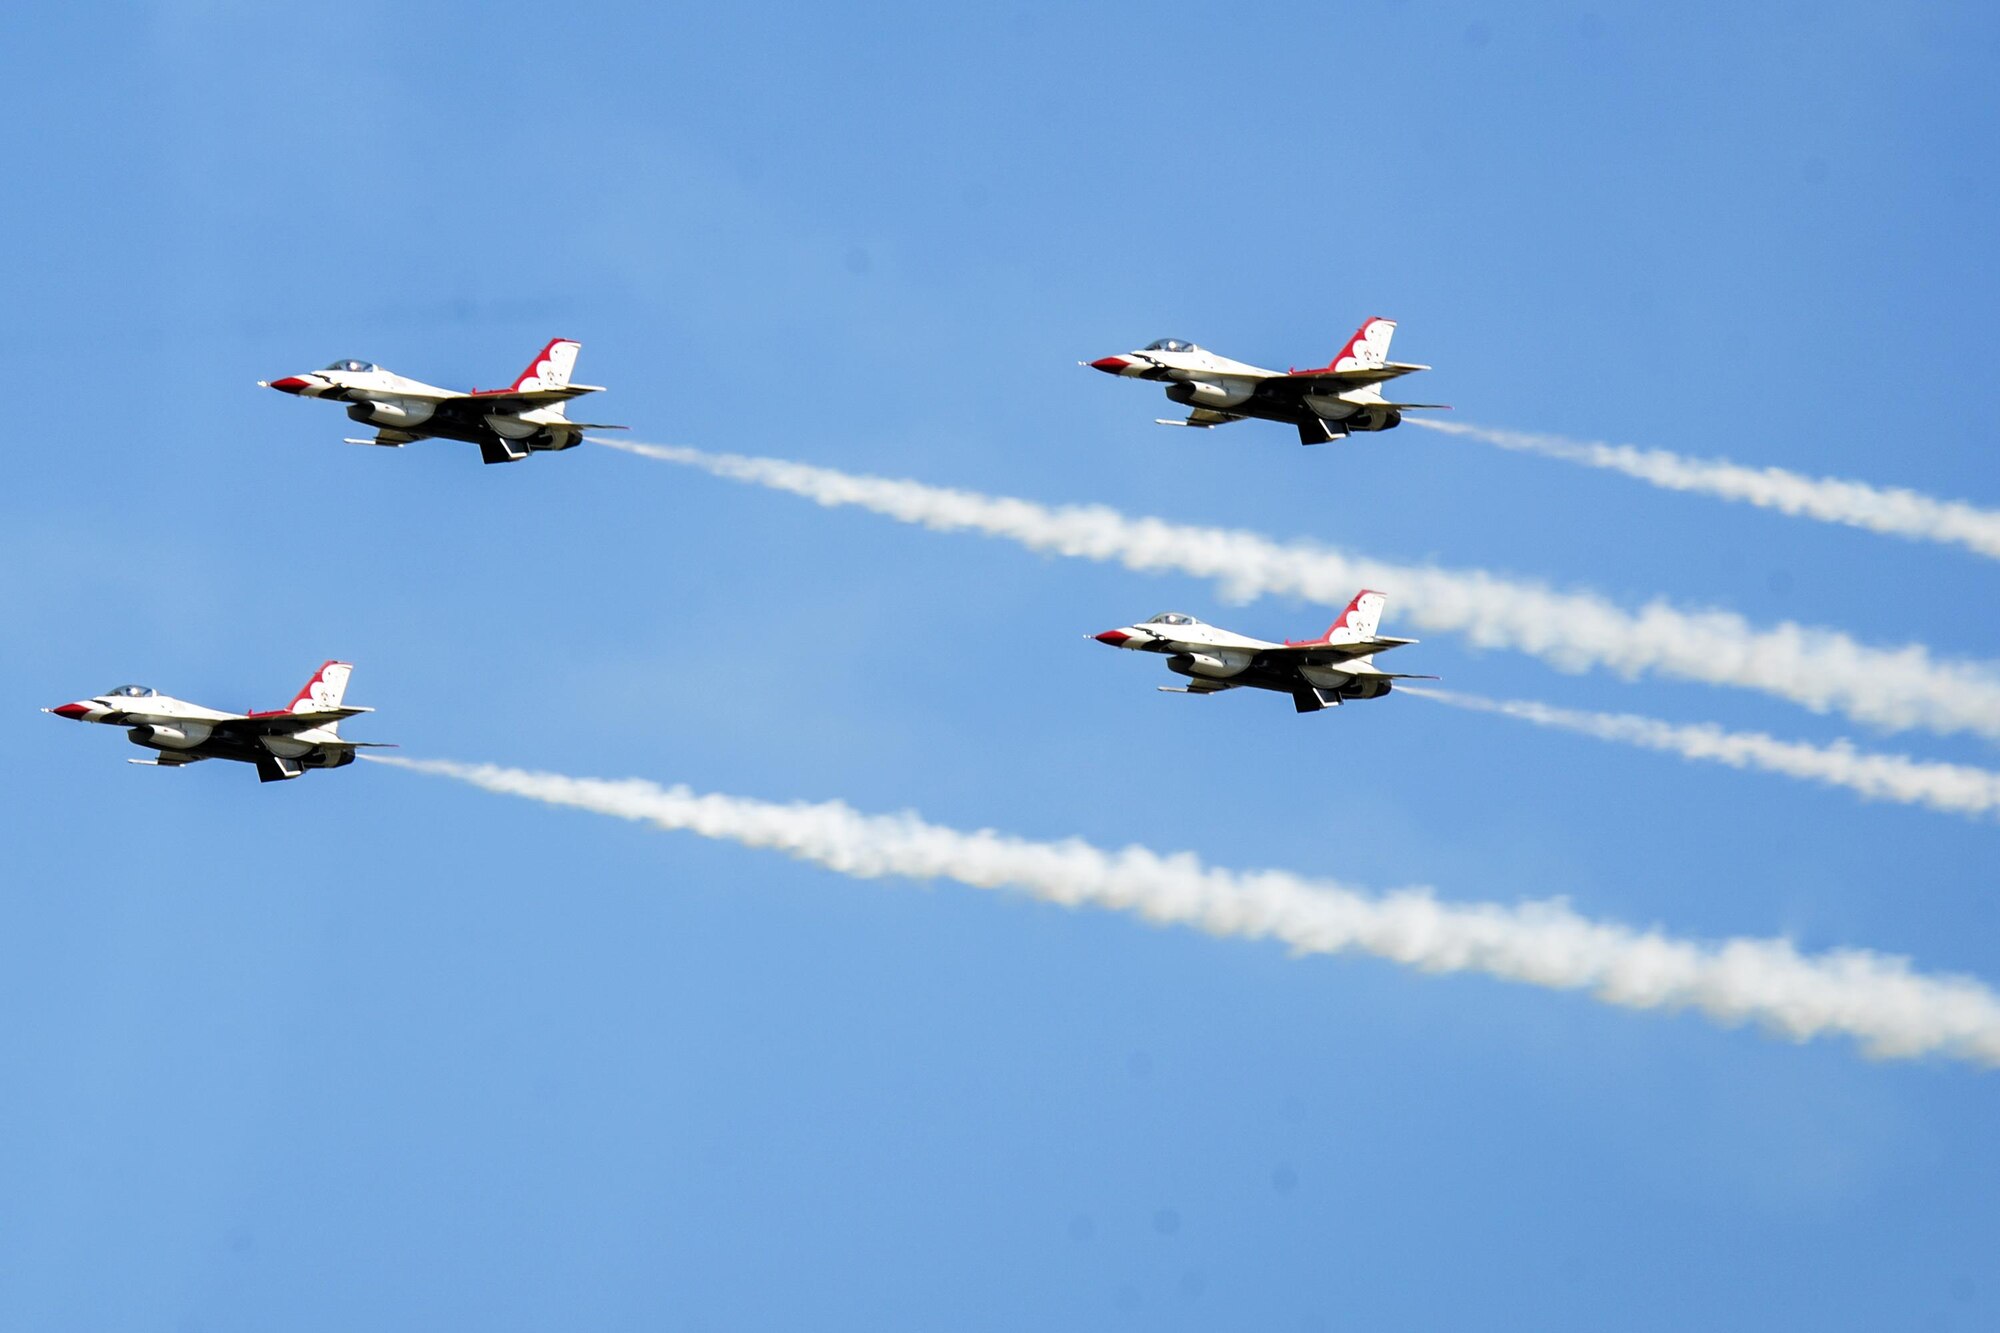 U.S Air Force Thunderbirds F-16 Fighting Falcons fly in formation during the Thunder Over South Georgia Air Show, Oct. 29, 2017 at Moody Air Force Base, Ga. The Thunderbirds performed twists, turns and rolls at high speeds demonstrating the prowess and capabilities of the F-16 Fighting Falcon. (U.S. Air Force photo by Airman Eugene Oliver)